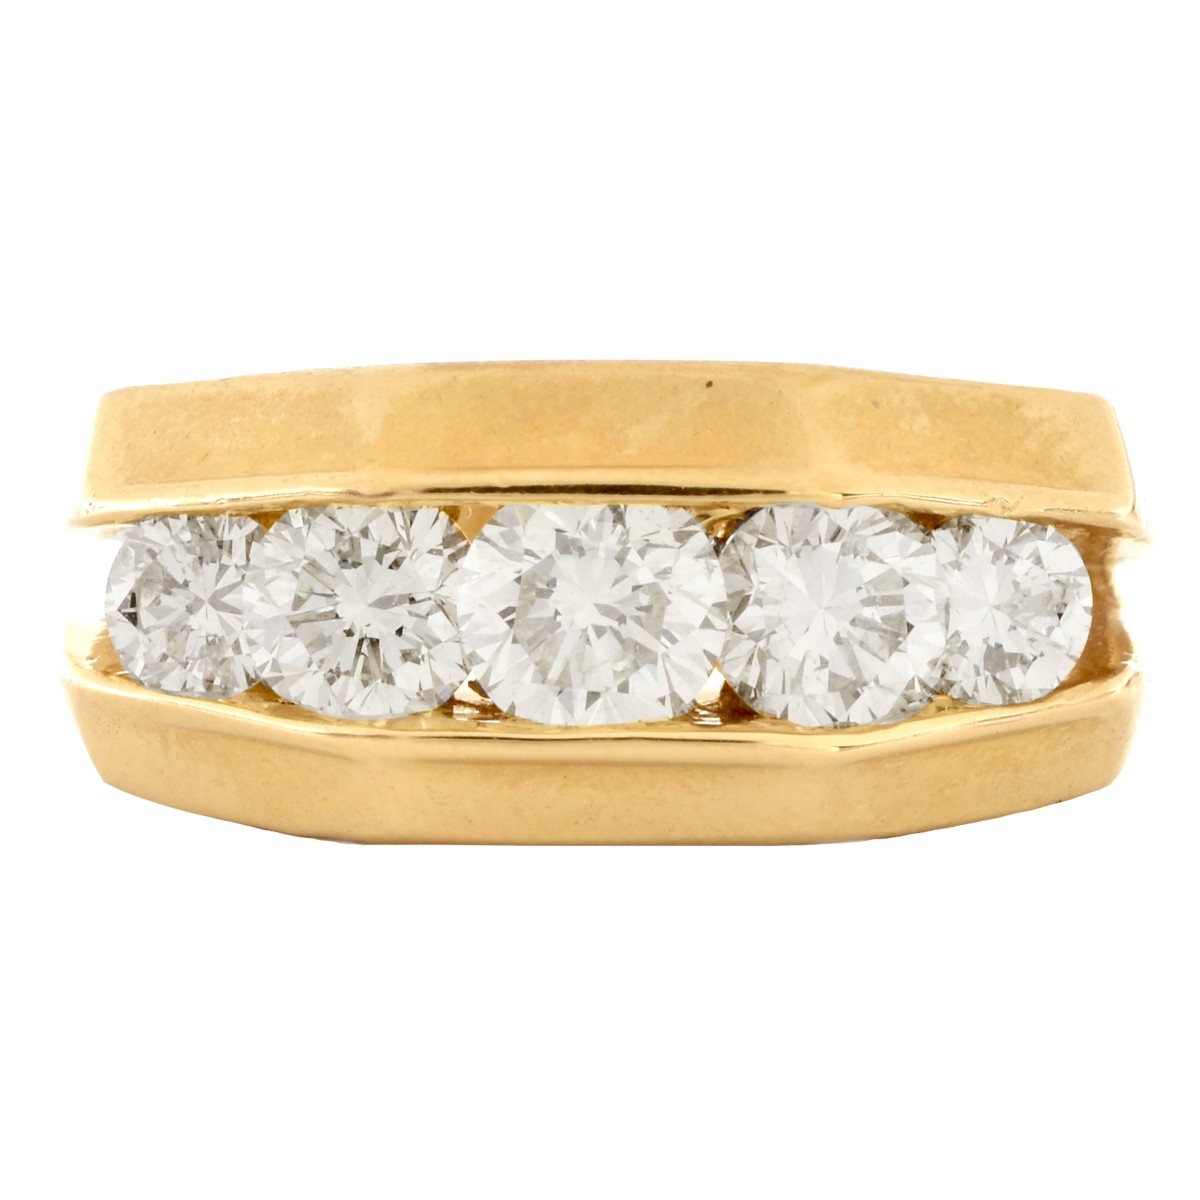 Man's 1.75ct Diamond and 14K Gold Ring